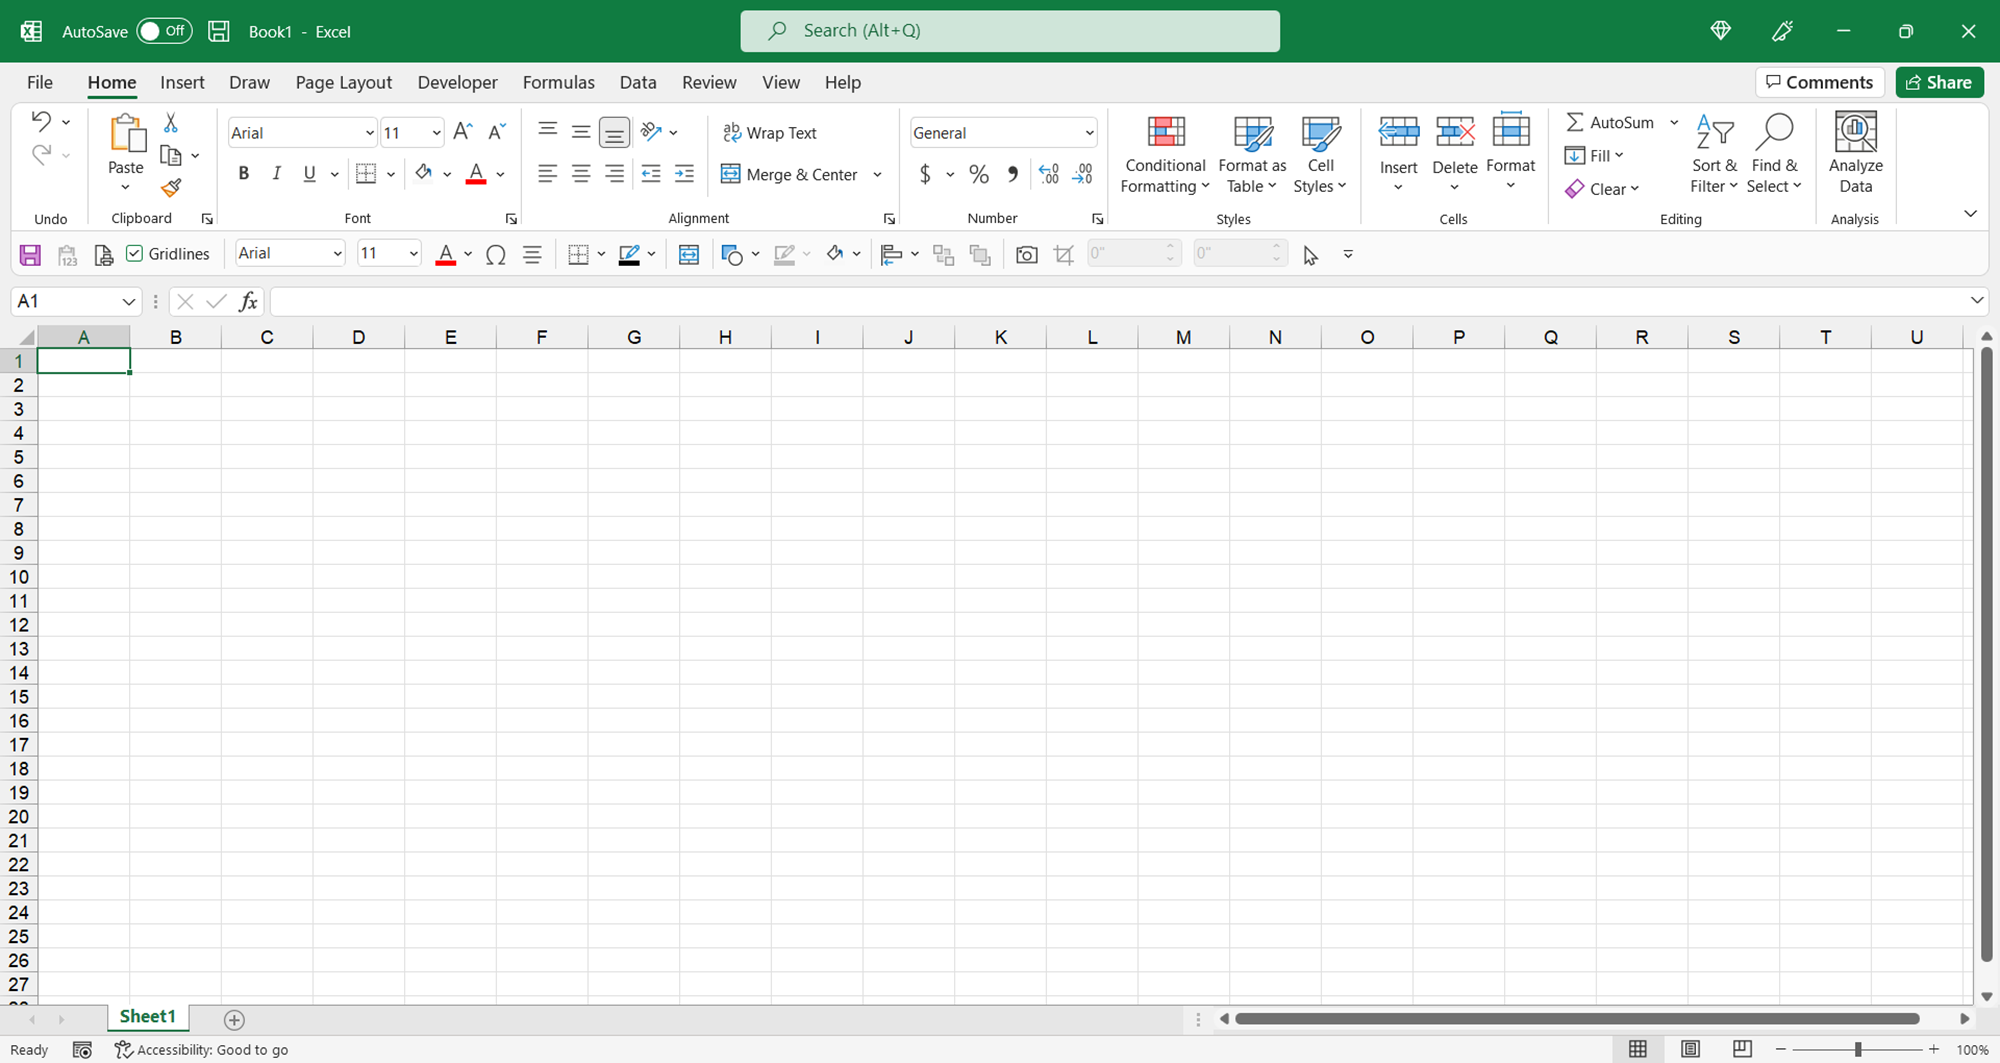 Blank canvas of Excel